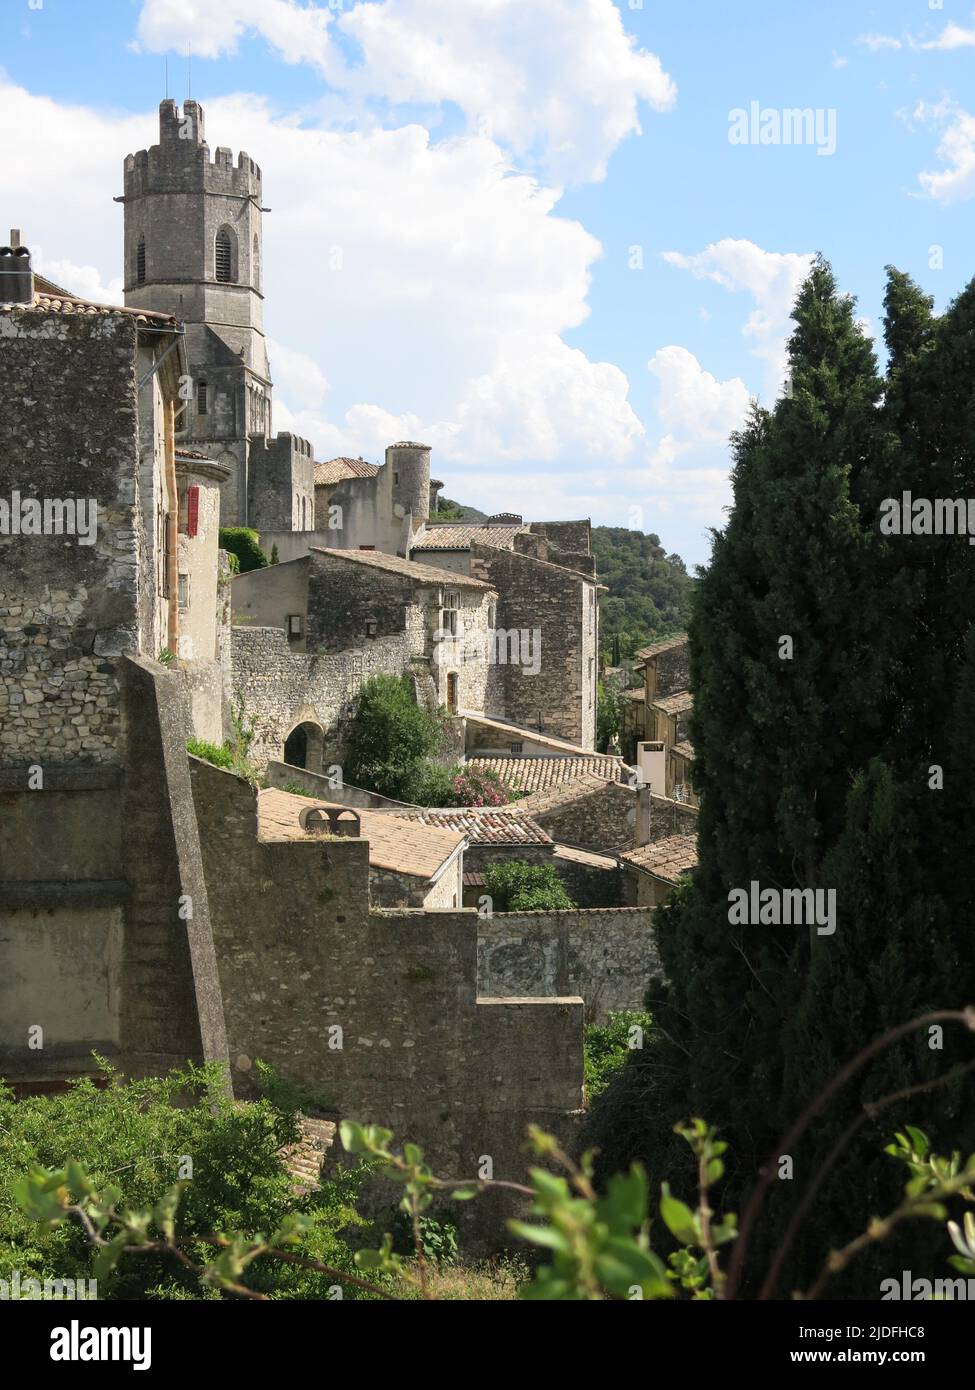 View from the St Vincent Cathedral over the rooftops and warren of narrow streets in Viviers, with historic buildings & the smallest city in France. Stock Photo